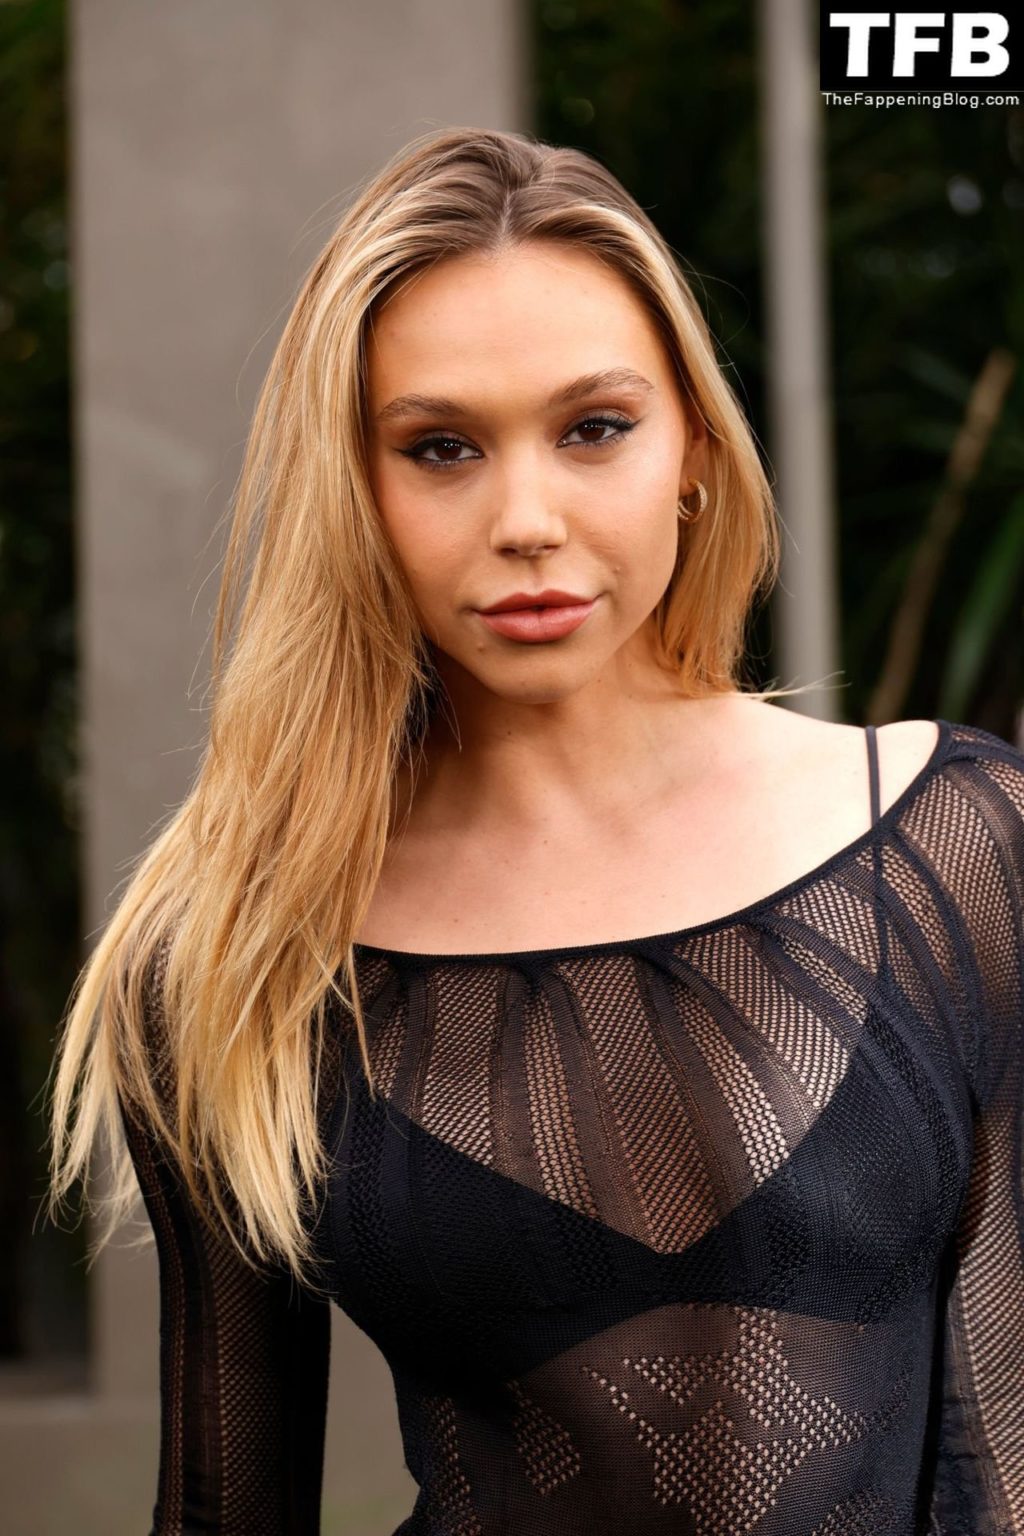 Alexis Ren Displays Her Slender Figure in a See-Through Dress at the “Jurassic World: Dominion” Premiere (41 Photos)